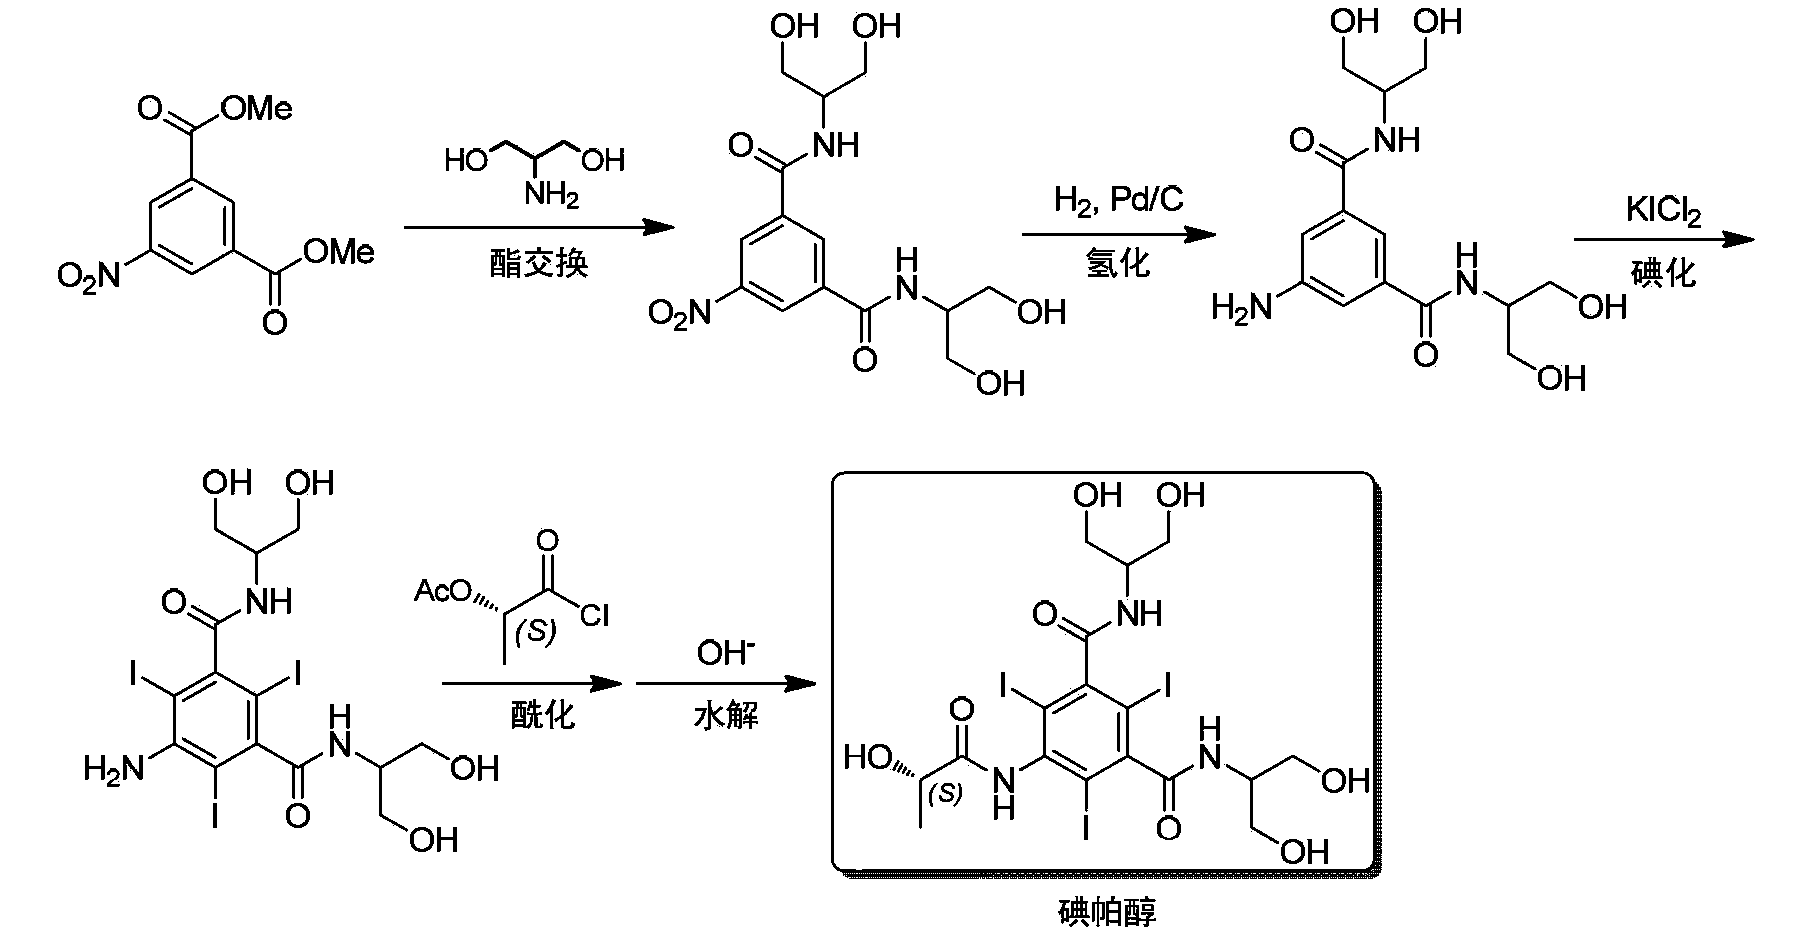 Synthesis of iopamidol and preparation of iopamidol synthesis intermediate